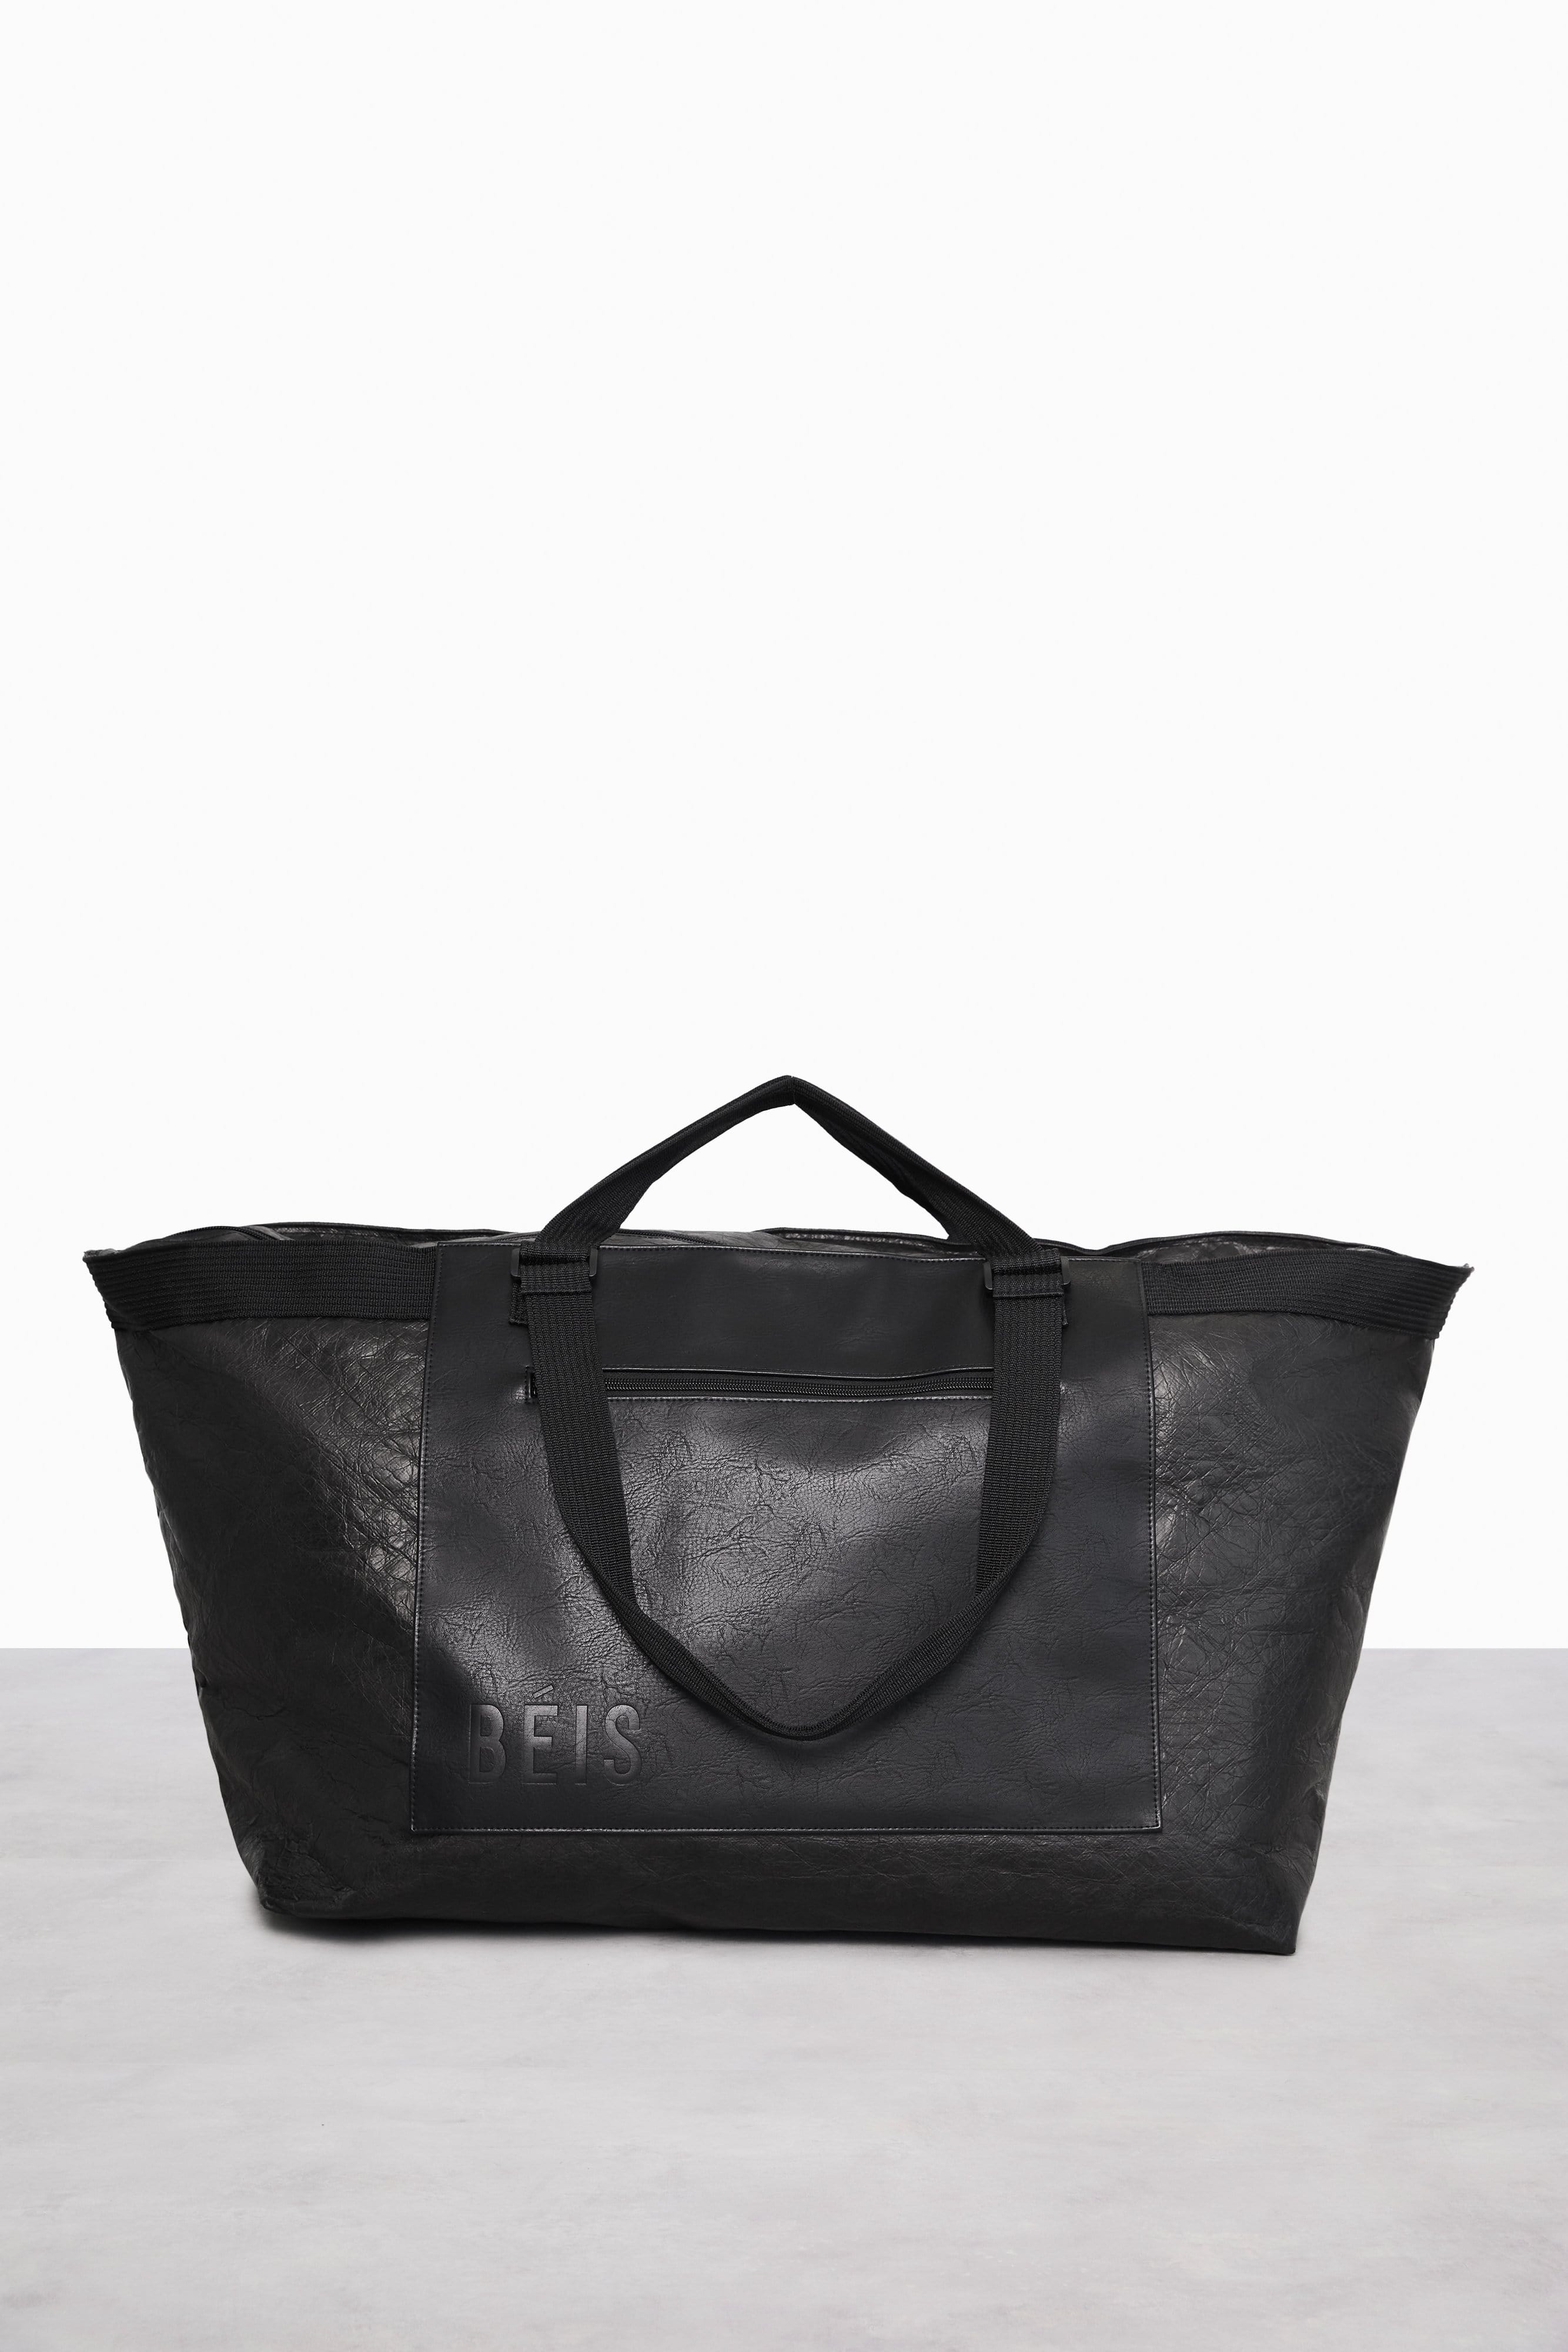 Extra Large Tote Bag